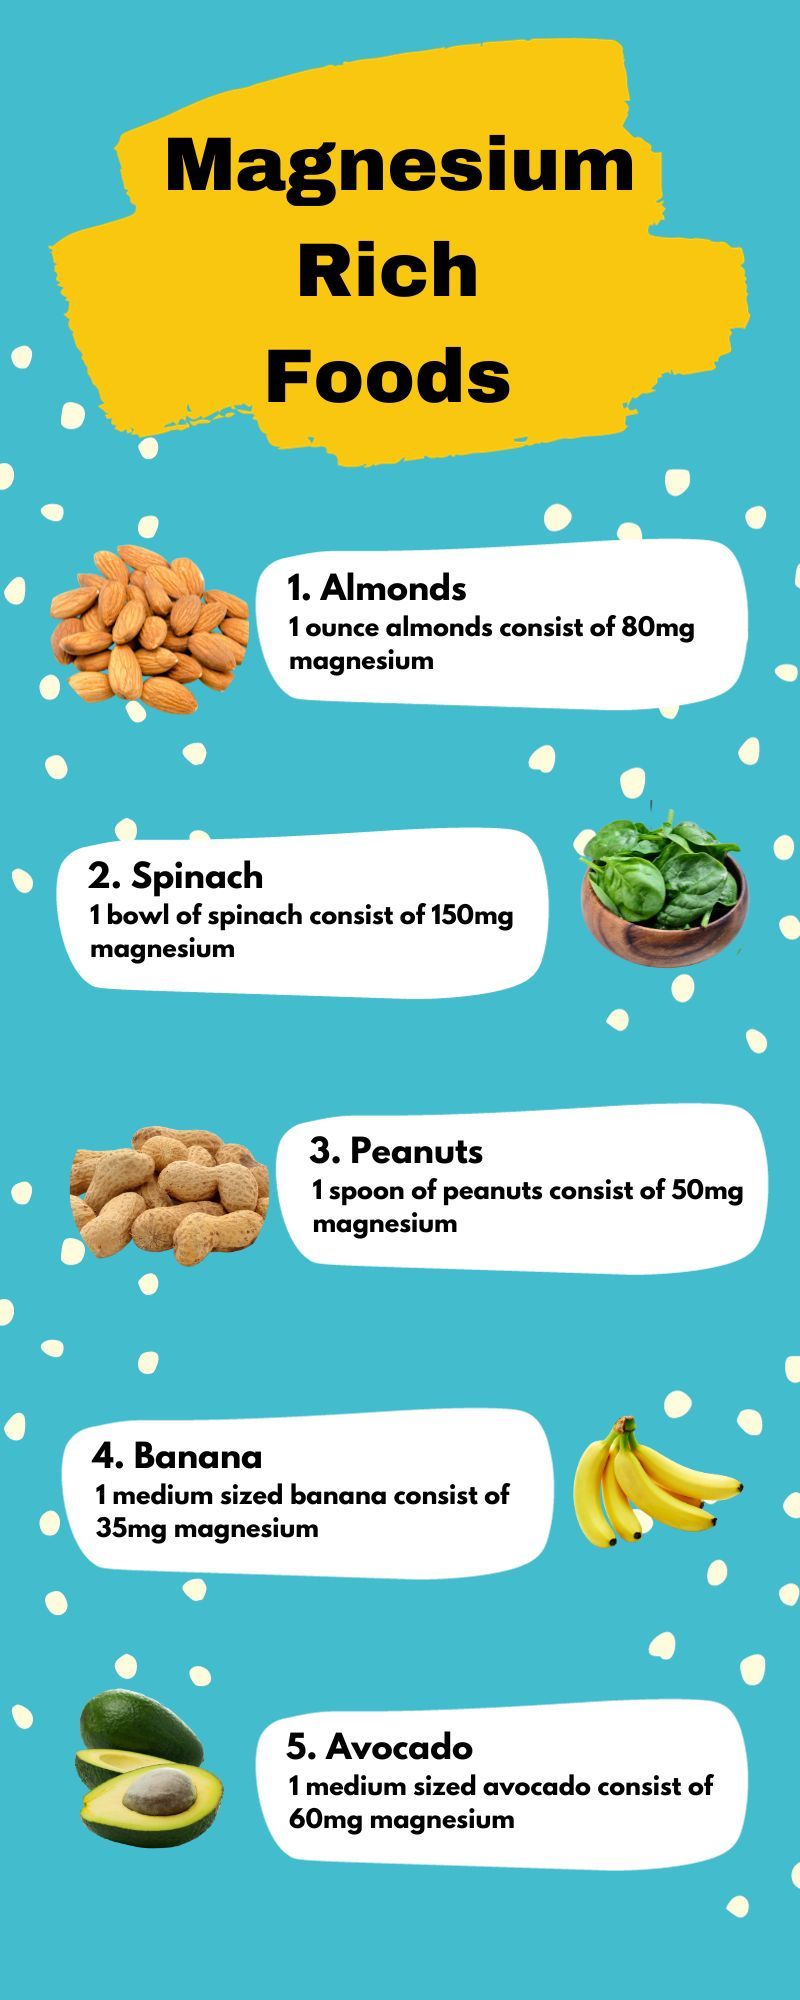 INFOGRAPHIC: 5 Magnesium Rich Foods you can easily add to your diet everyday.